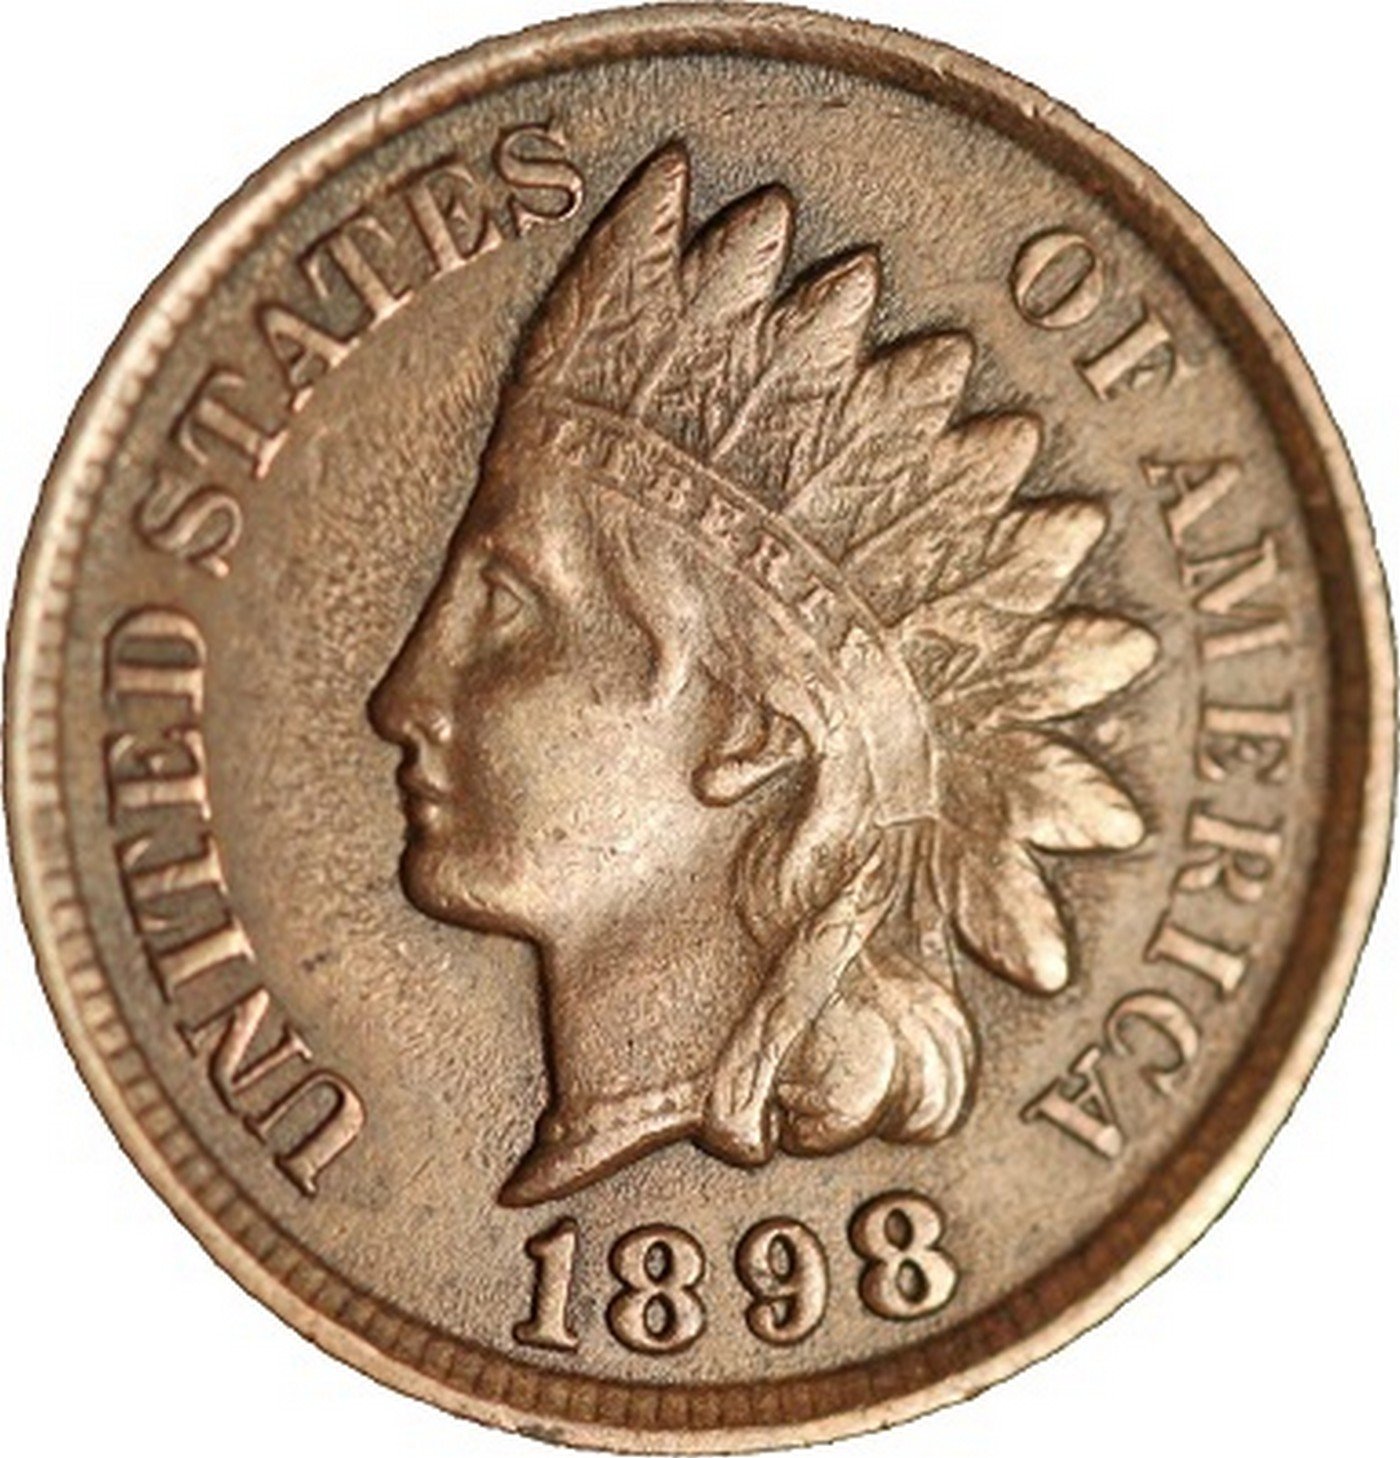 1898 RPD-005 - Indian Head Penny - Photo by David Poliquin